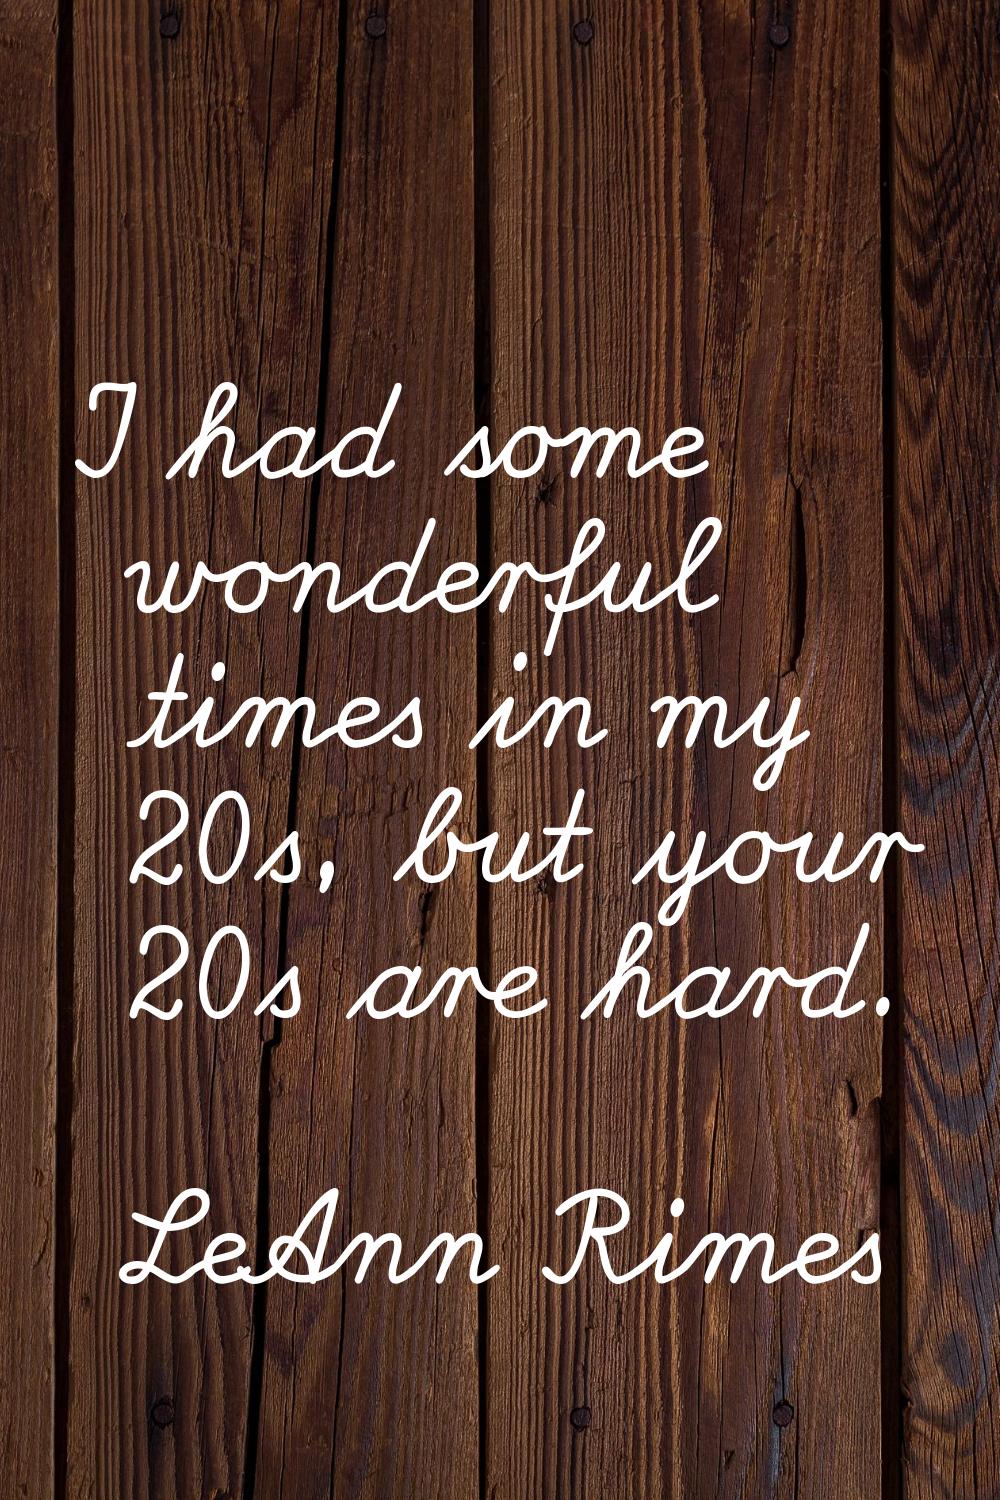 I had some wonderful times in my 20s, but your 20s are hard.